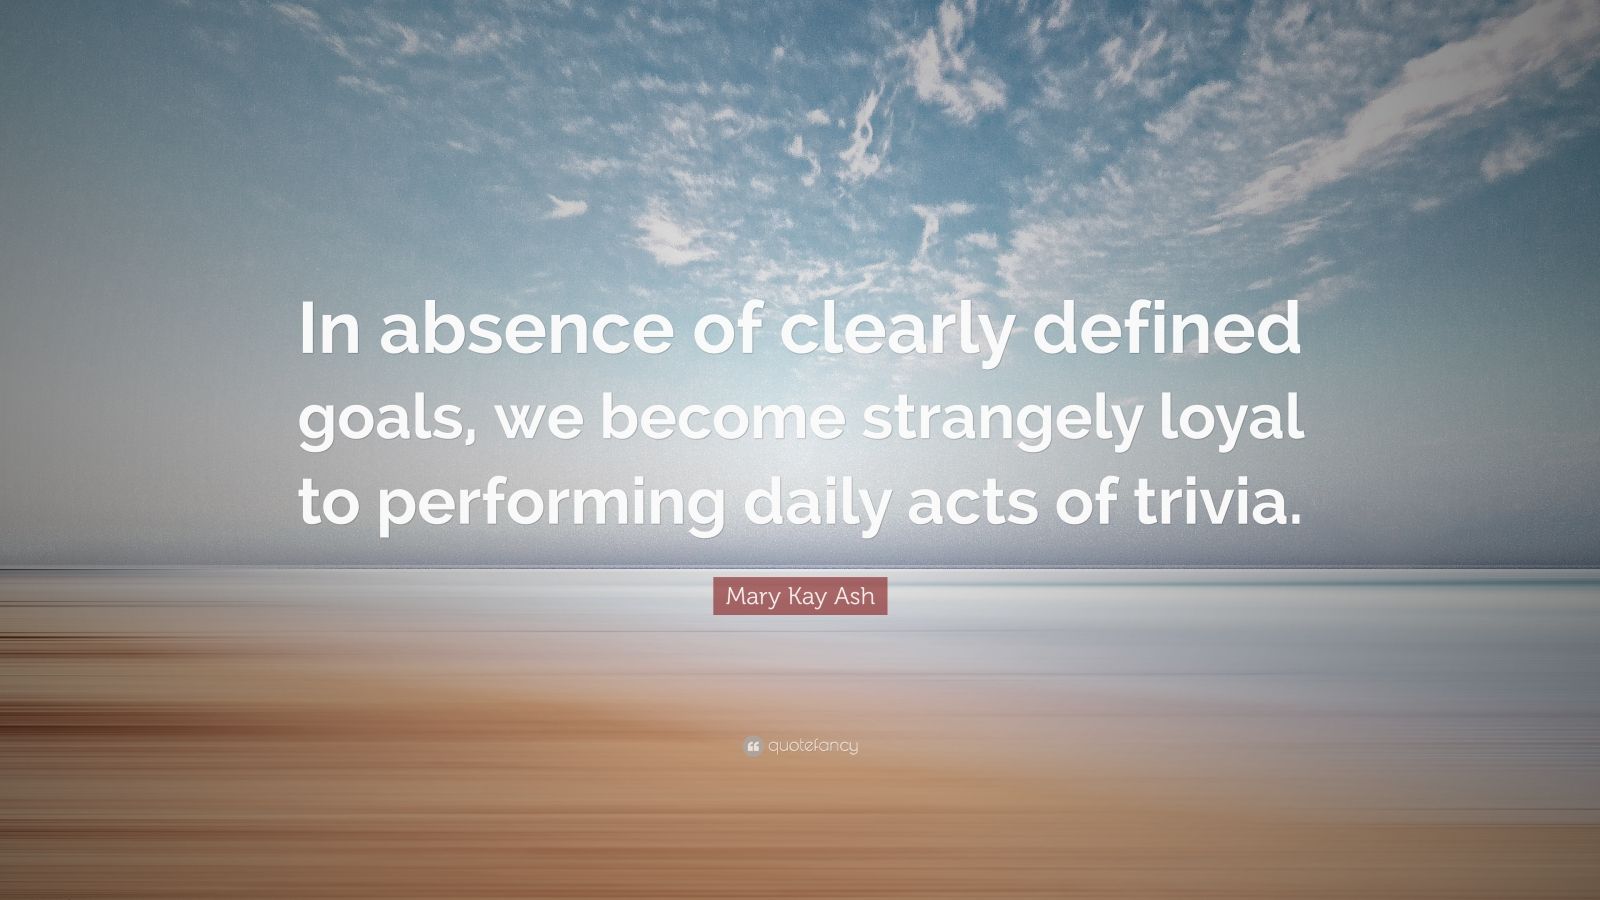 Mary Kay Ash Quote: “In absence of clearly defined goals, we become